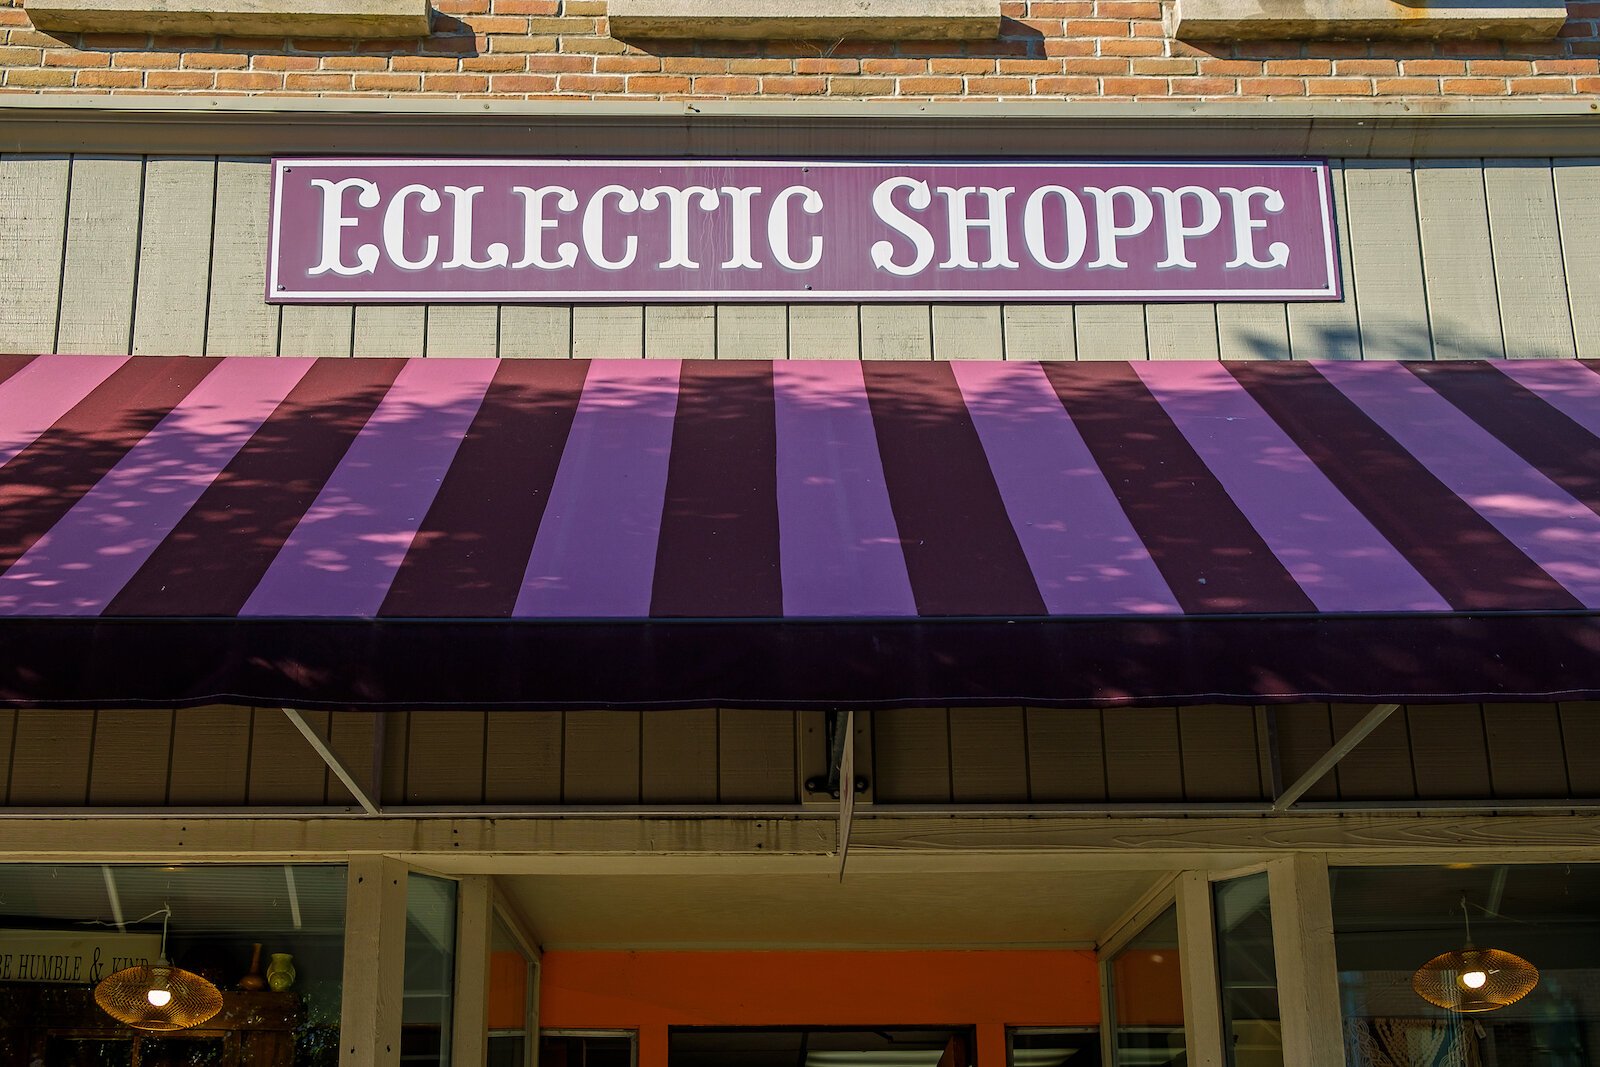 The Eclectic Shoppe at 42 W. Canal St. in Downtown Wabash sells local makers' work.